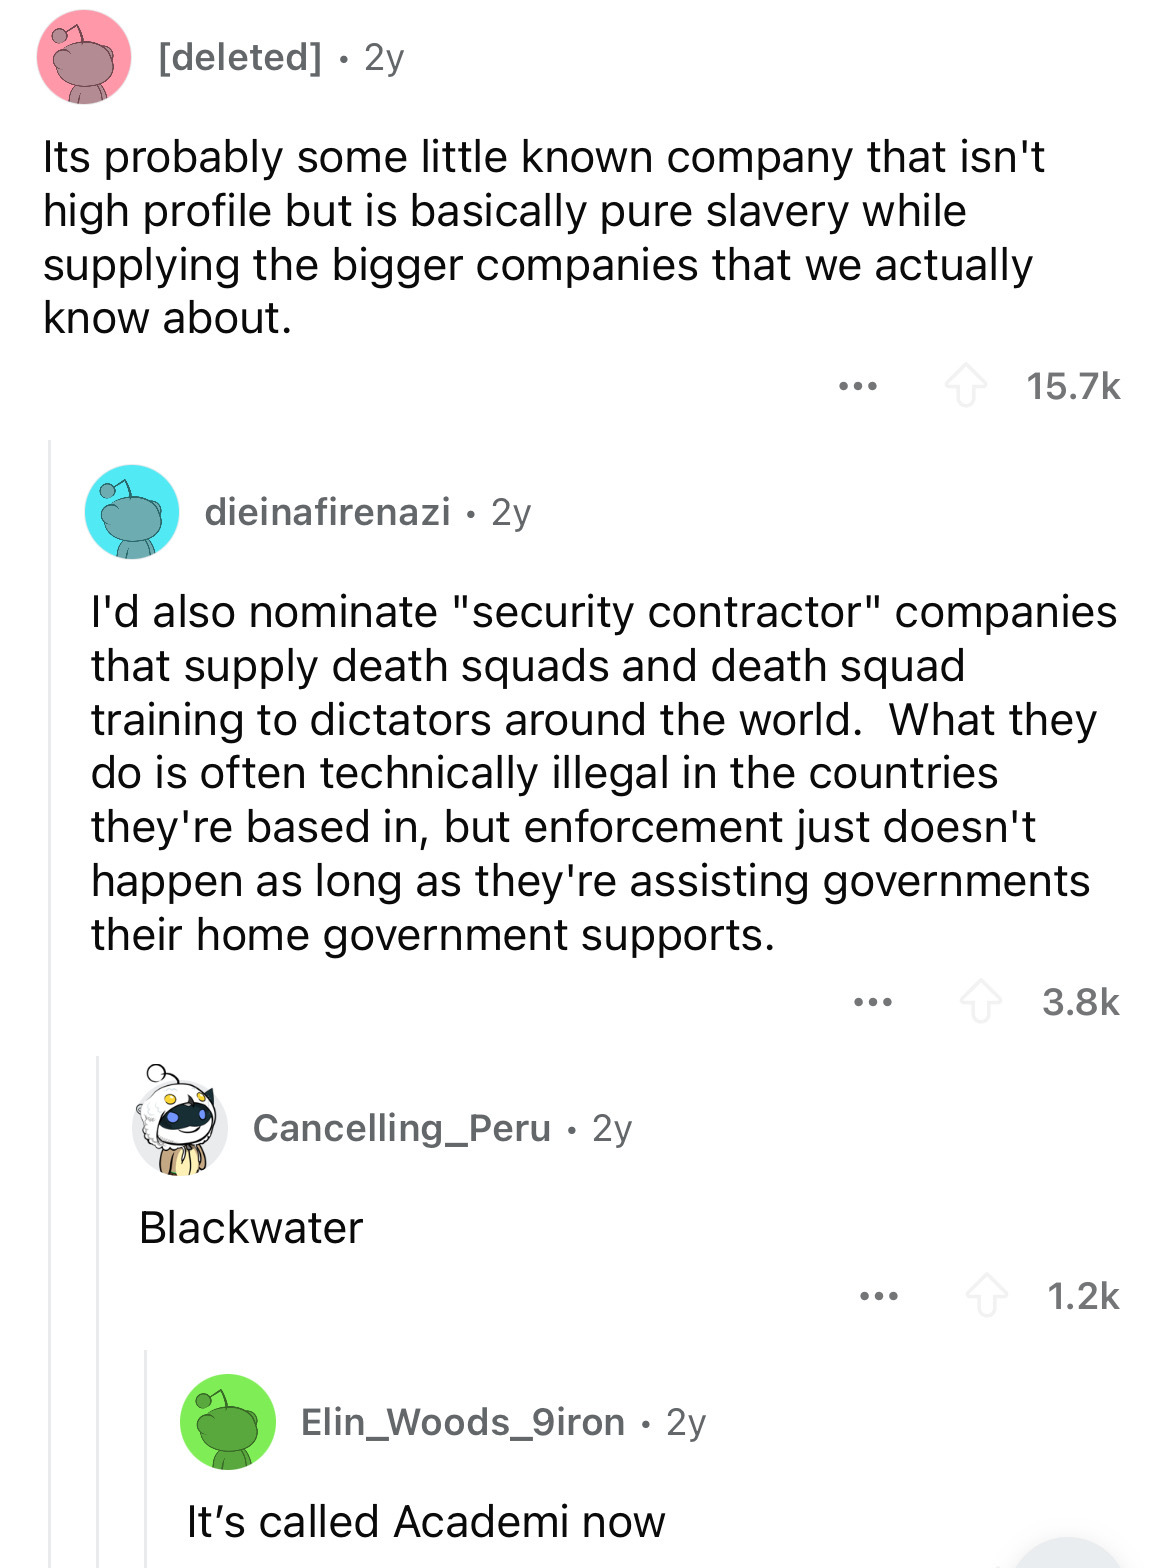 screenshot - deleted 2y Its probably some little known company that isn't high profile but is basically pure slavery while supplying the bigger companies that we actually know about. ... dieinafirenazi 2y I'd also nominate "security contractor" companies 